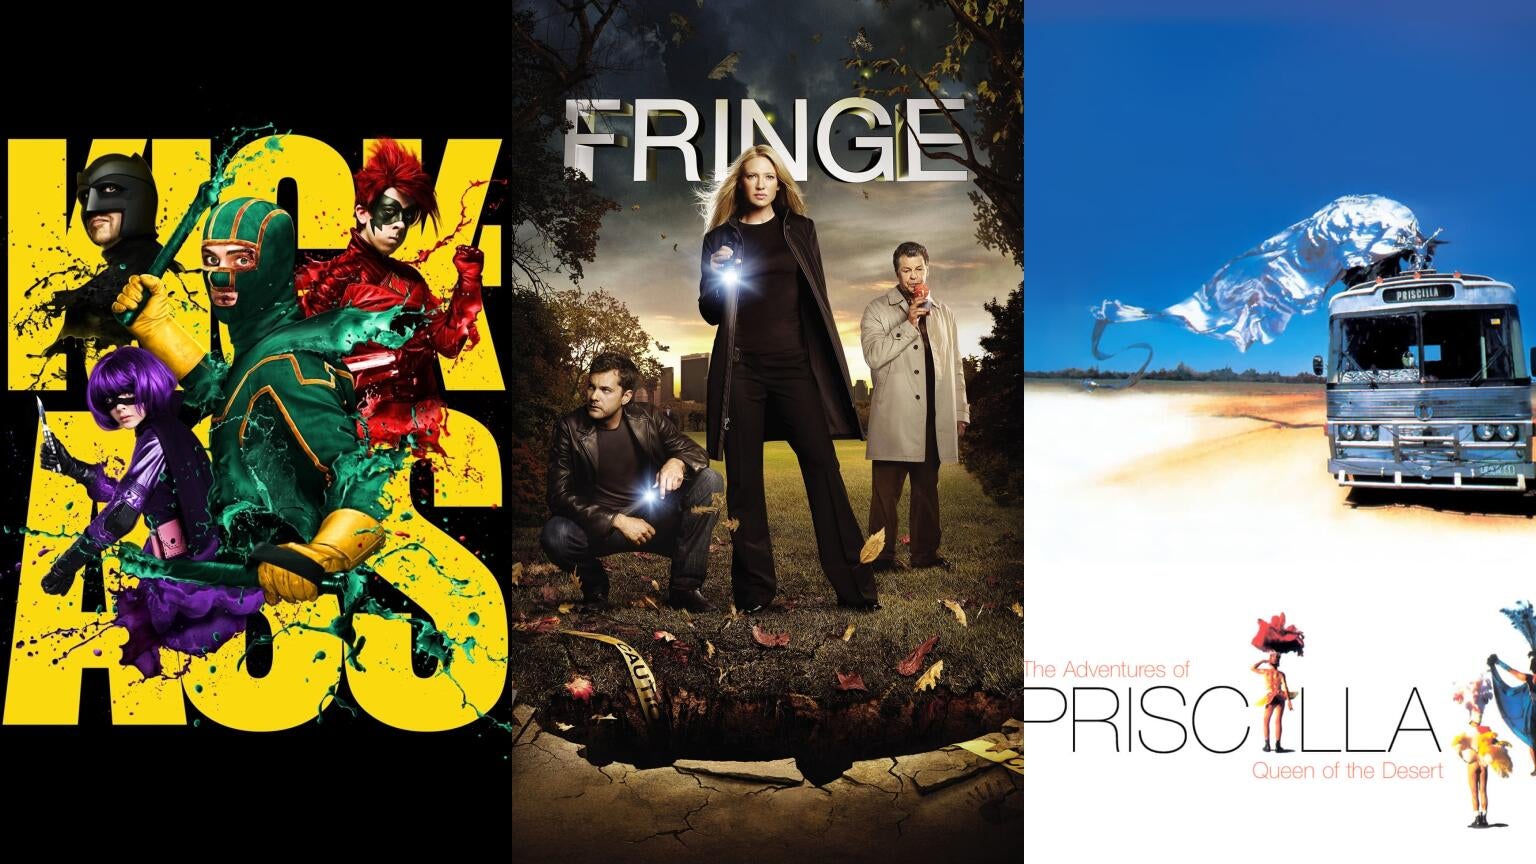 Posters for "Kick-Ass"; "Fringe"; and "The Adventures of Priscilla, Queen of the Desert"